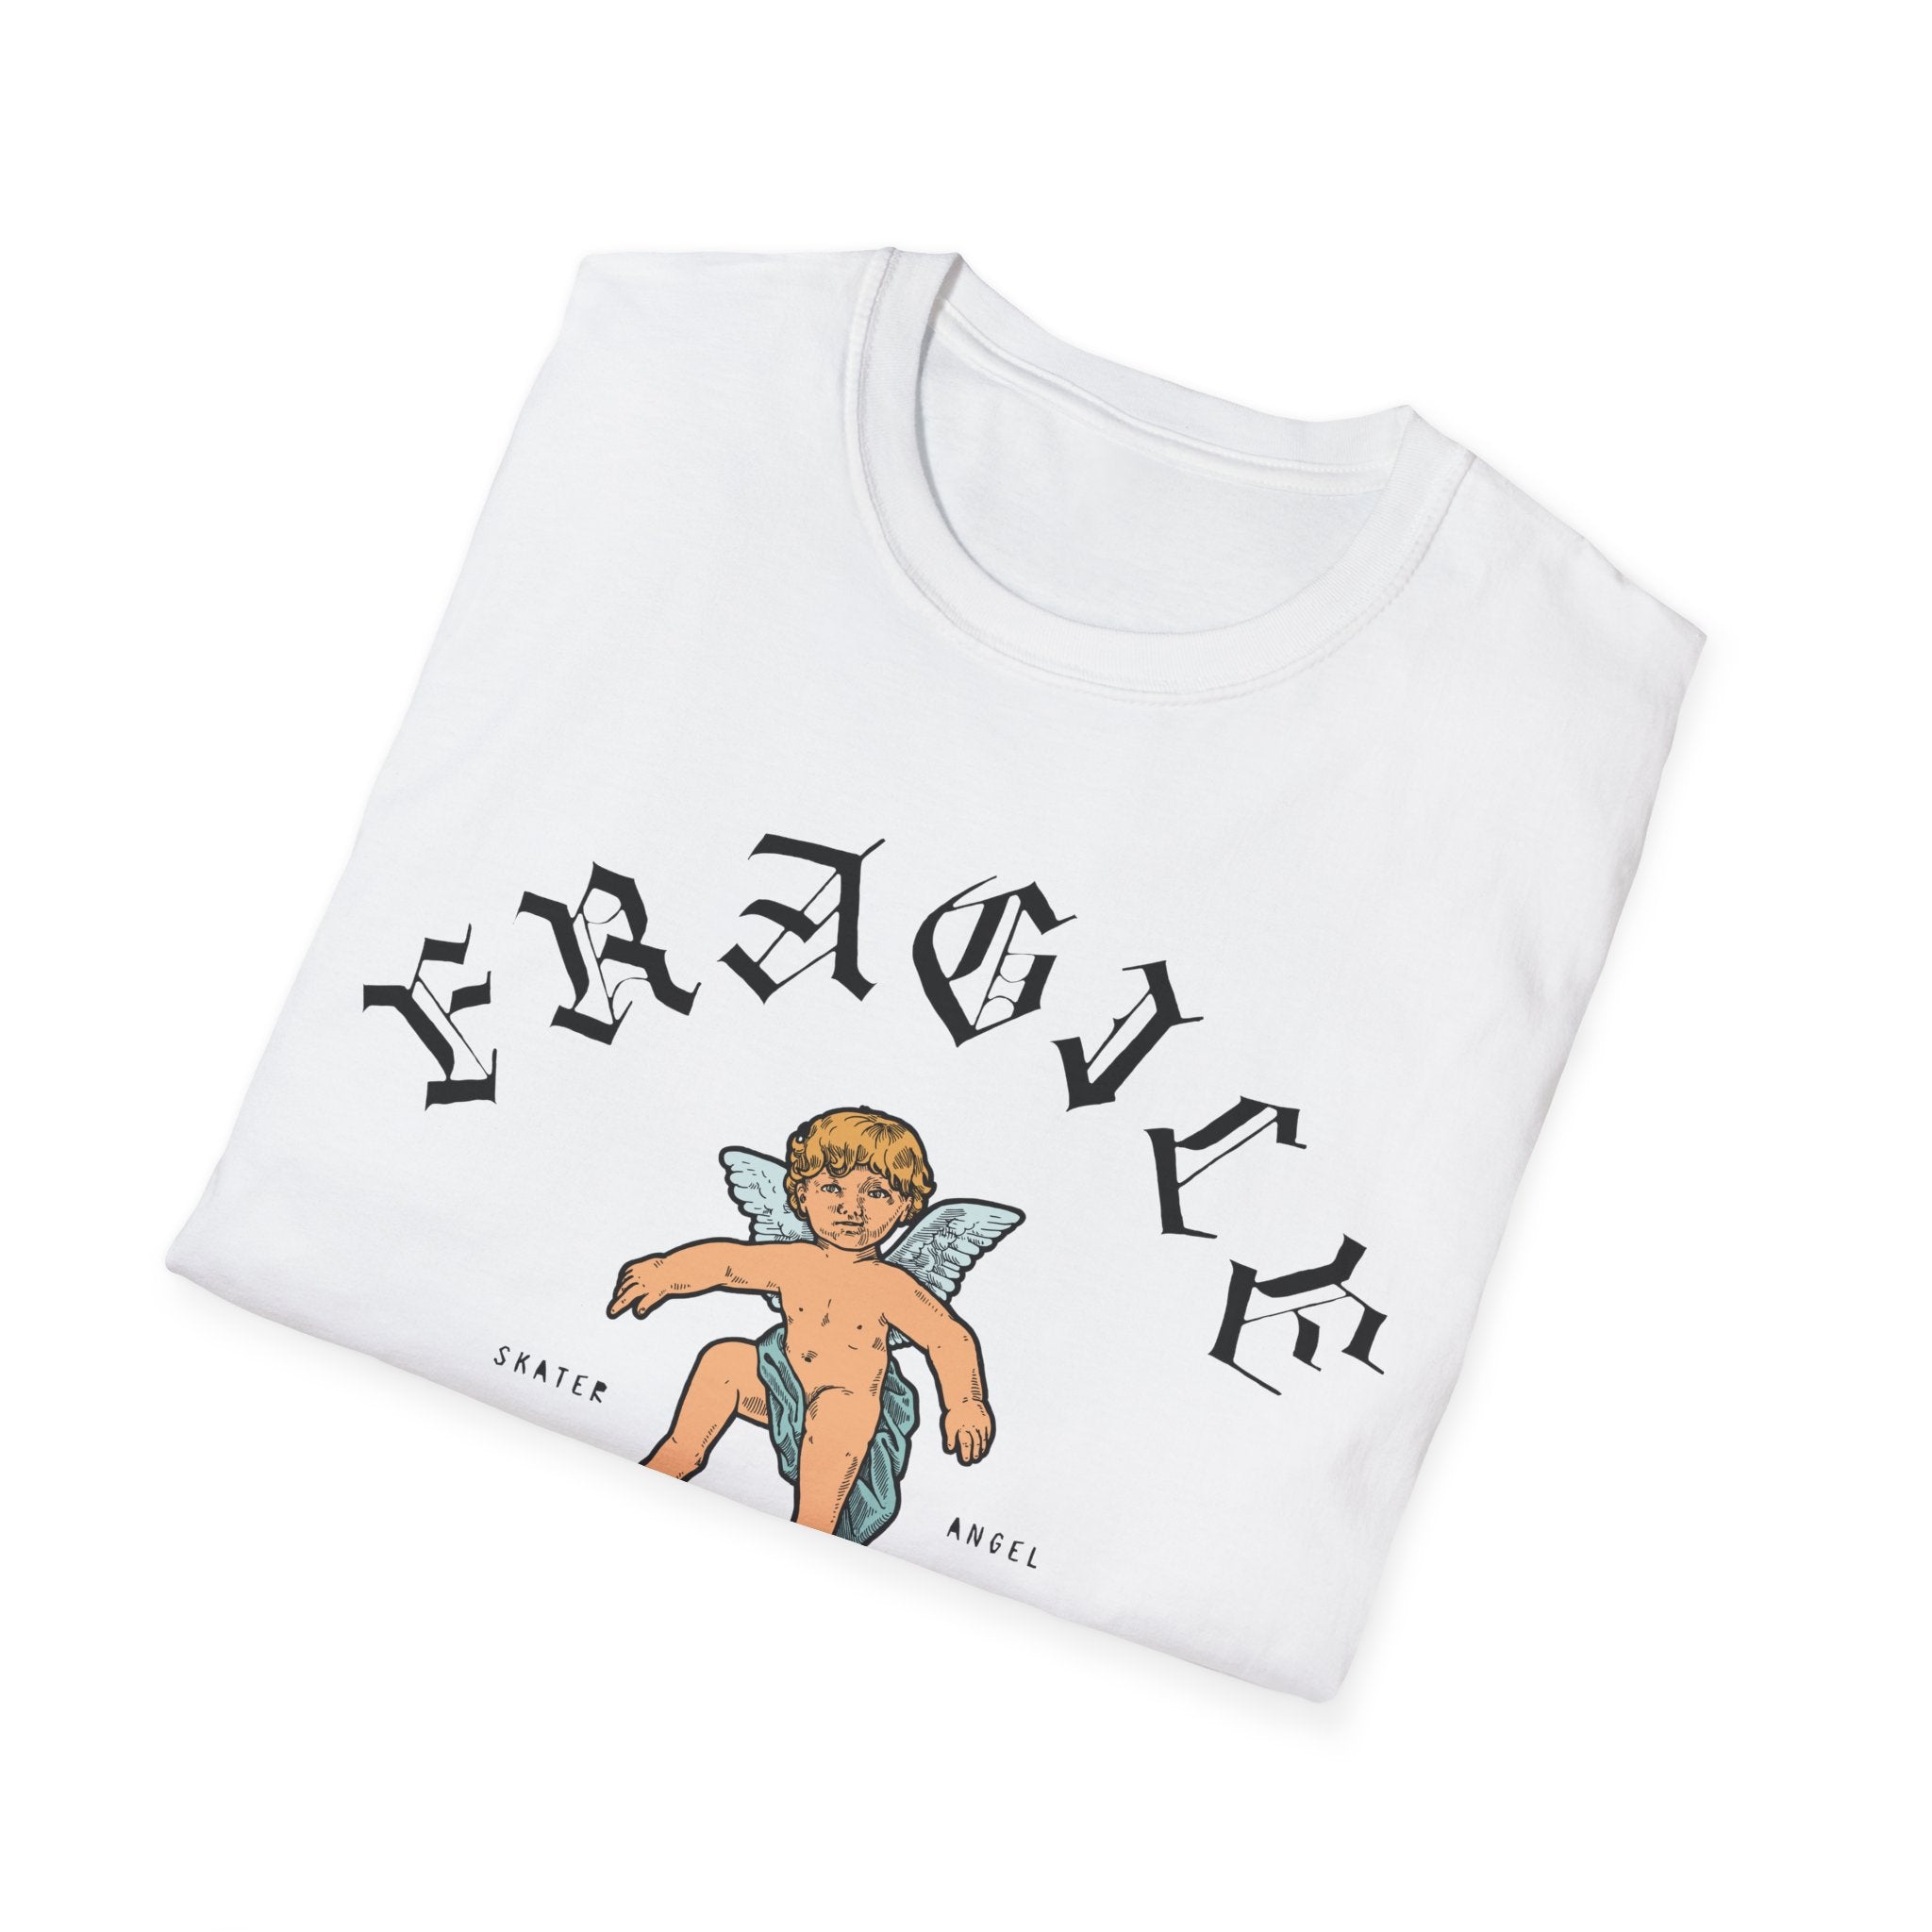 A soft, relaxed fit Skater Angel t-shirt featuring an image of a baby with the word fragile written on it.